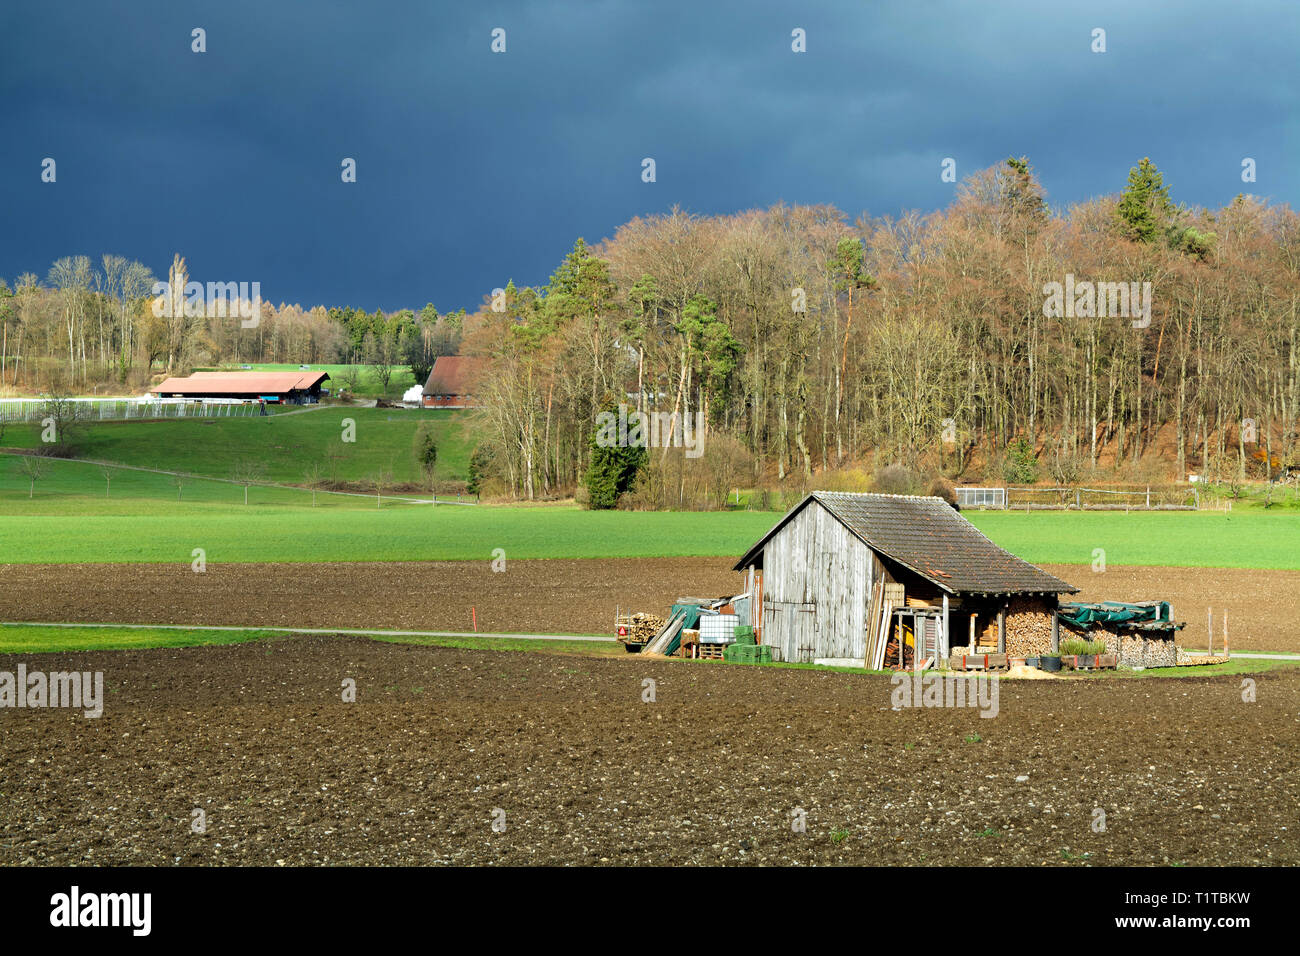 A rural Swiss landscape in the village of Kloten near Zürich with fields and trees and in the foreground a barn under a dark cloudy sky. Stock Photo